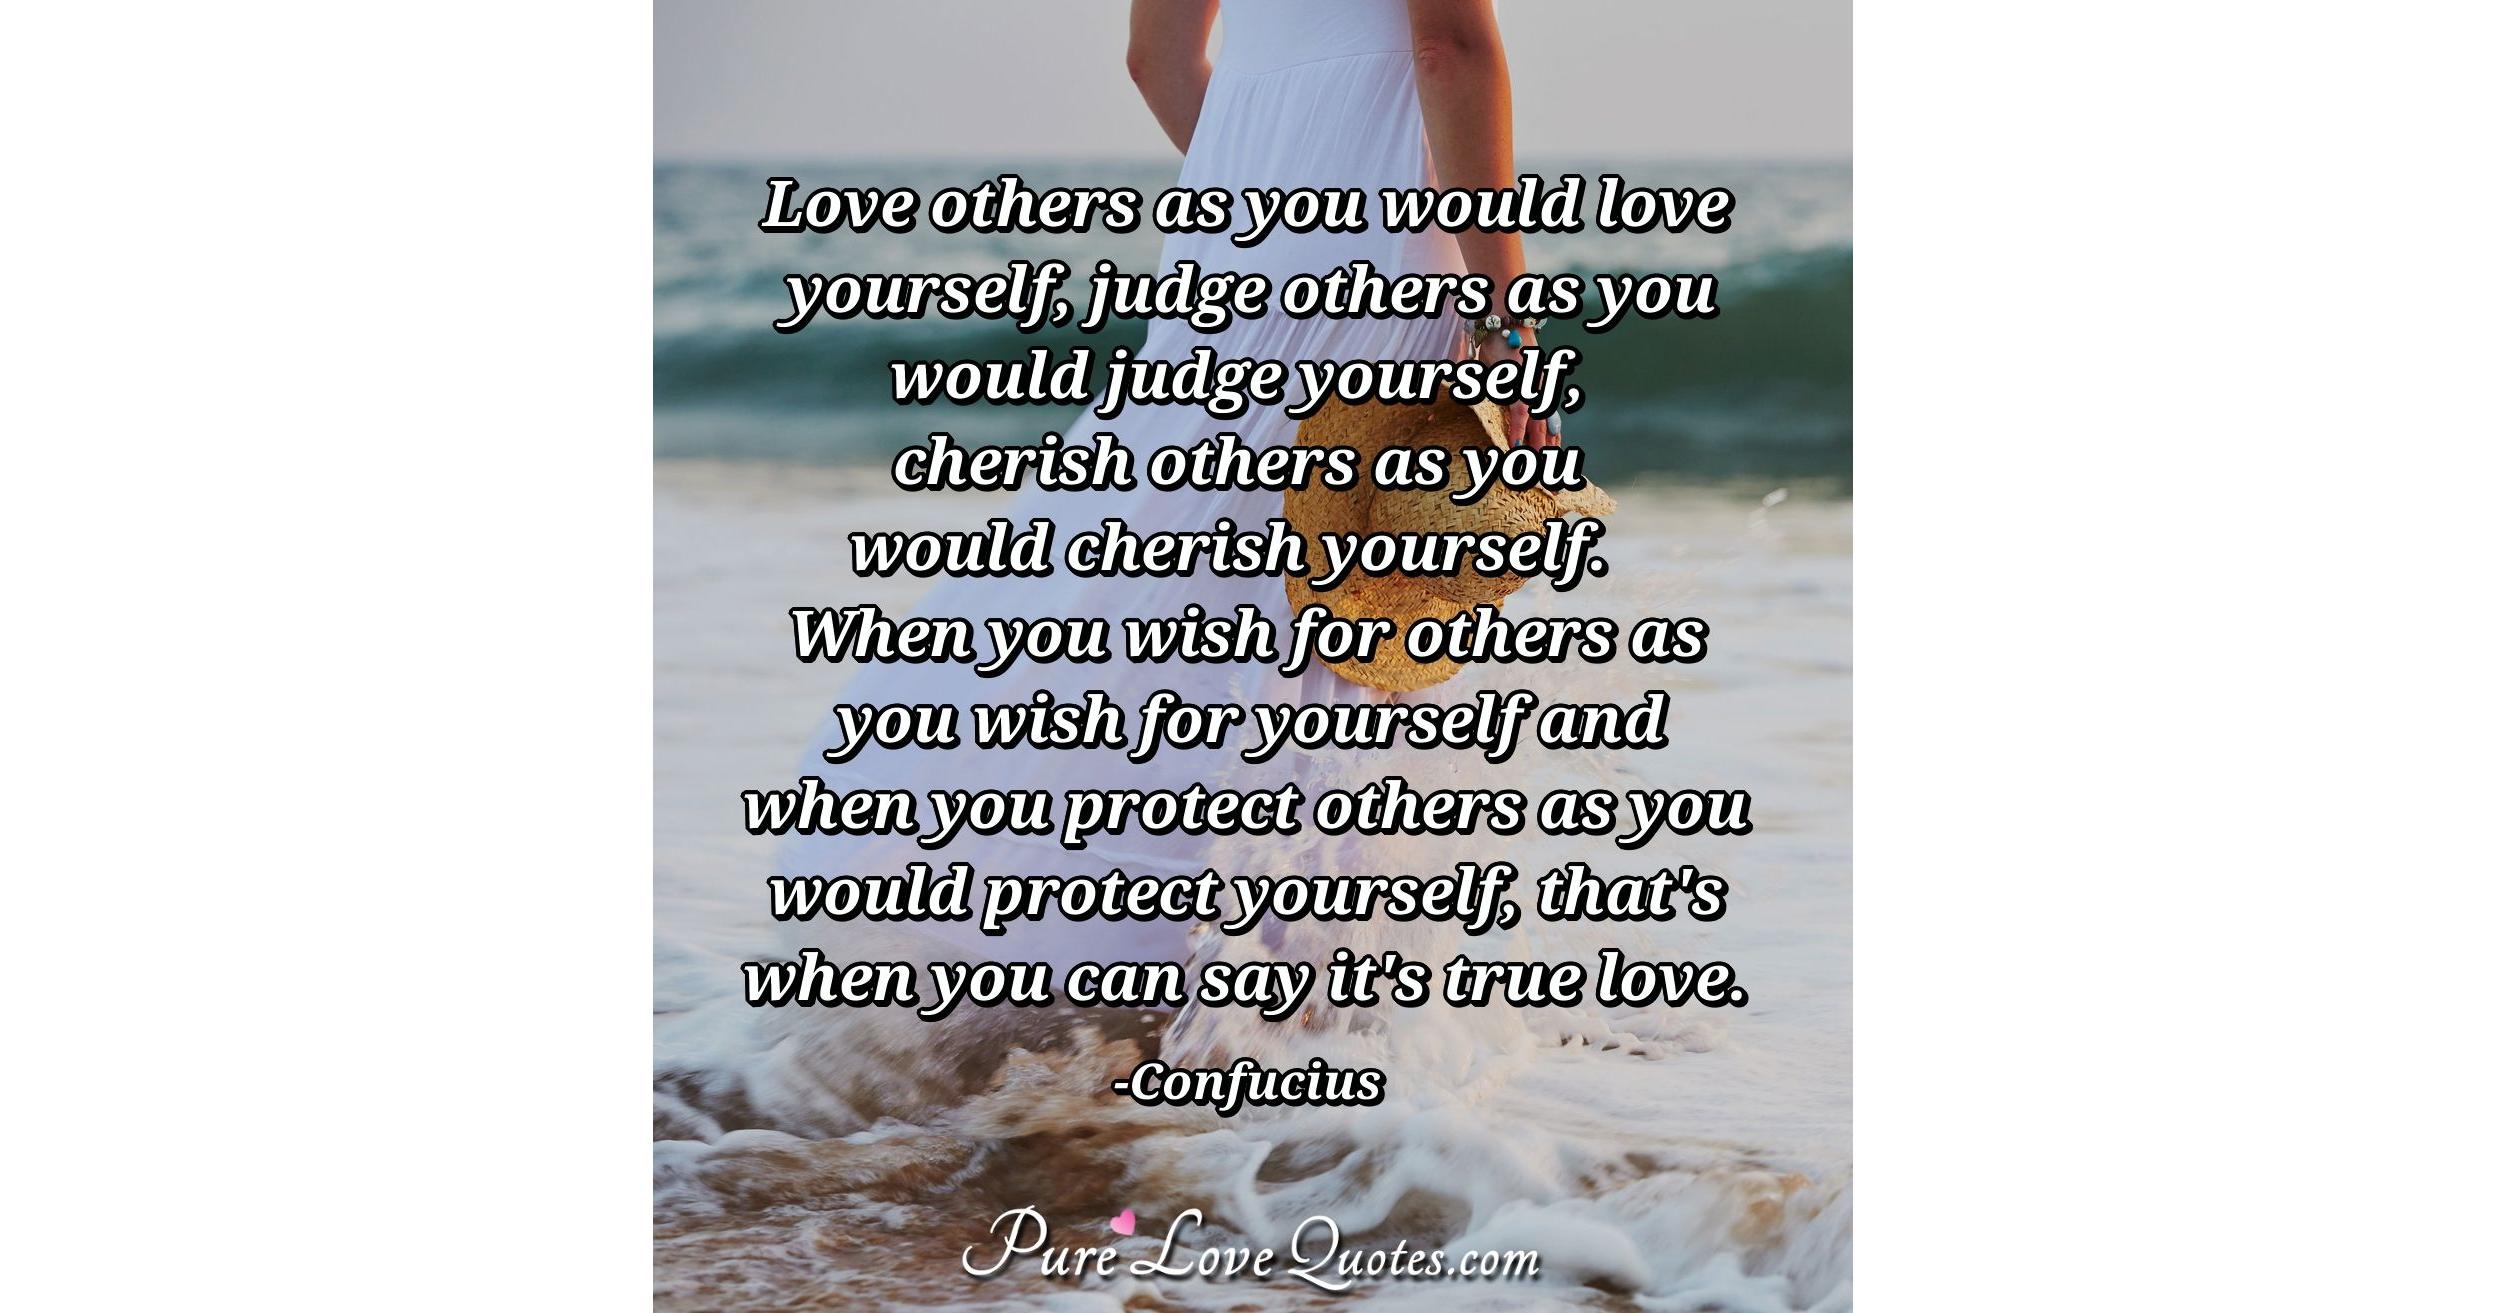 Love others as you would love yourself, judge others as you would judge